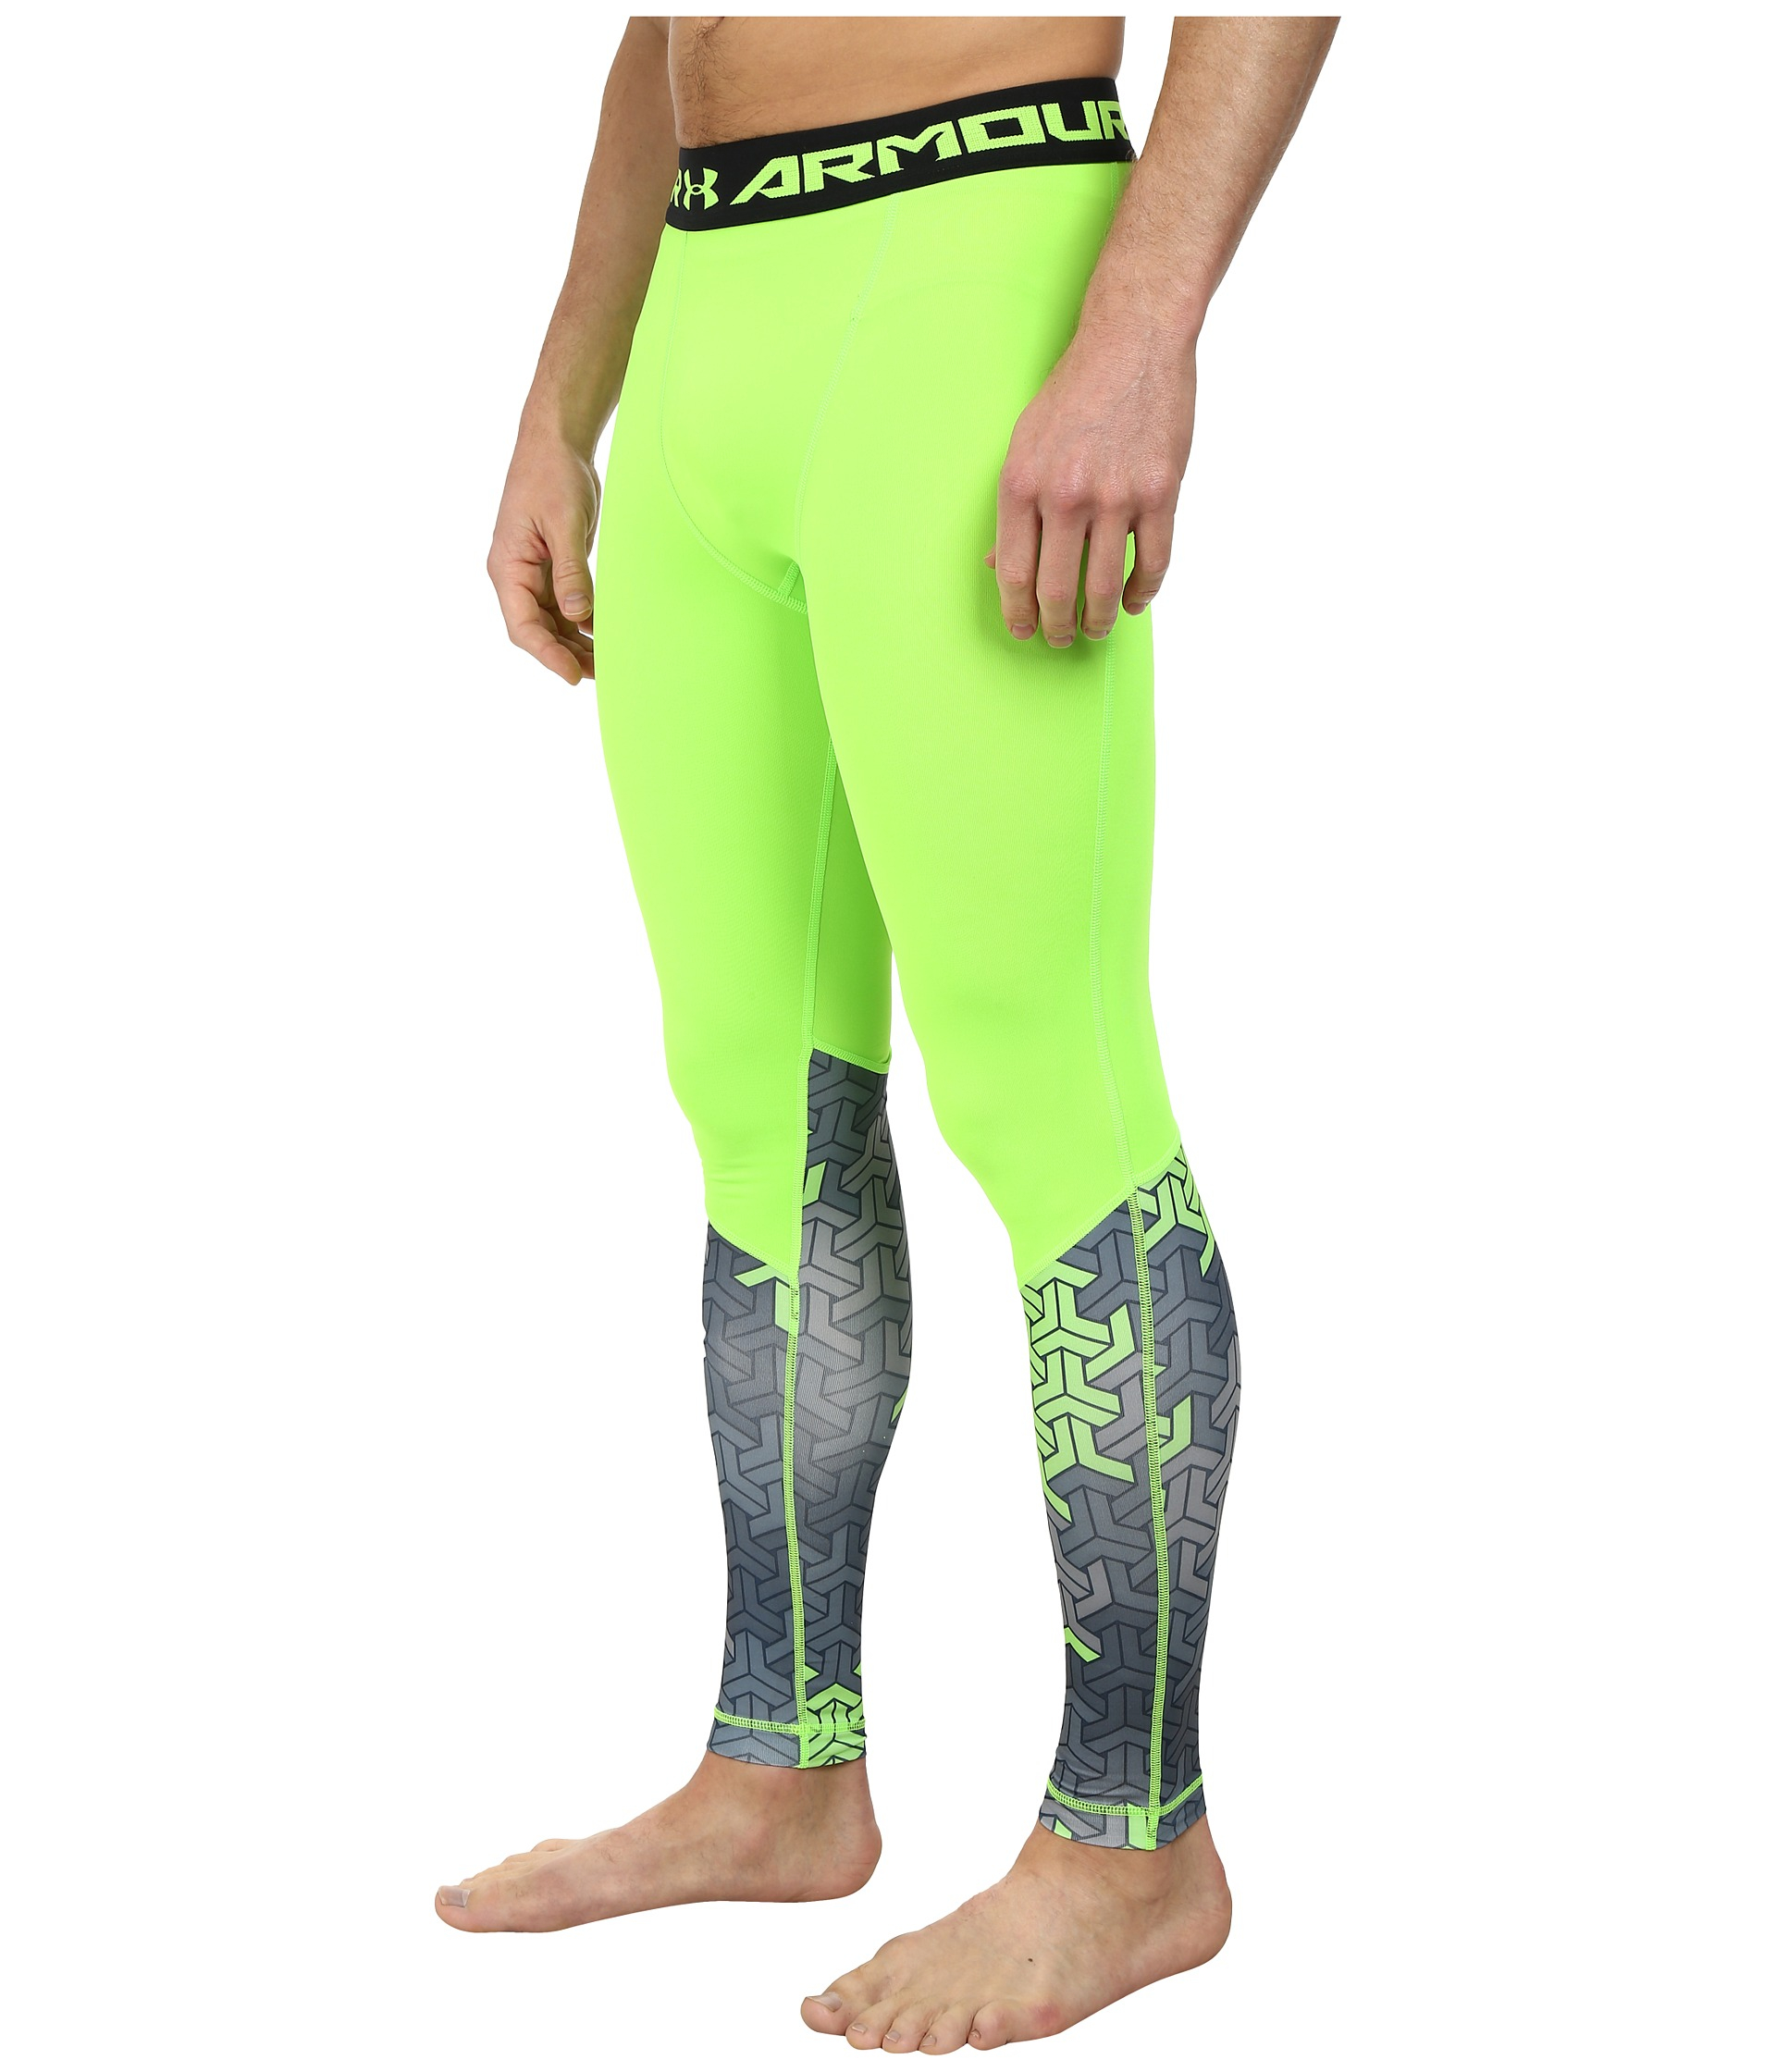 Lyst - Under armour Ua Army Of 11 Compression Legging in Green for Men